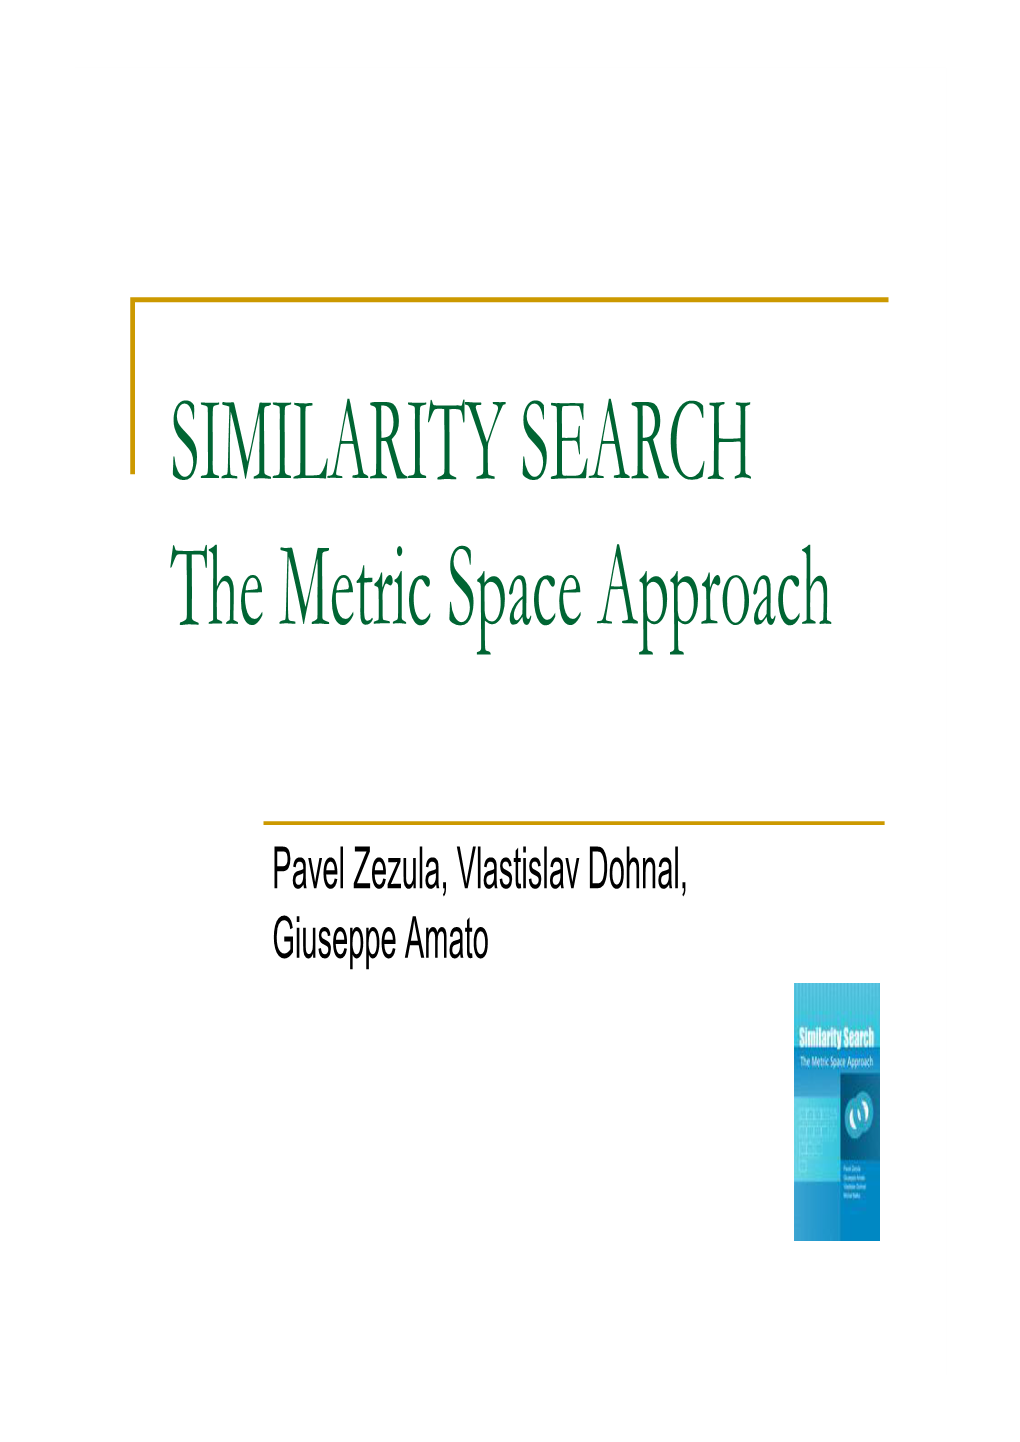 SIMILARITY SEARCH the Metric Space Approach